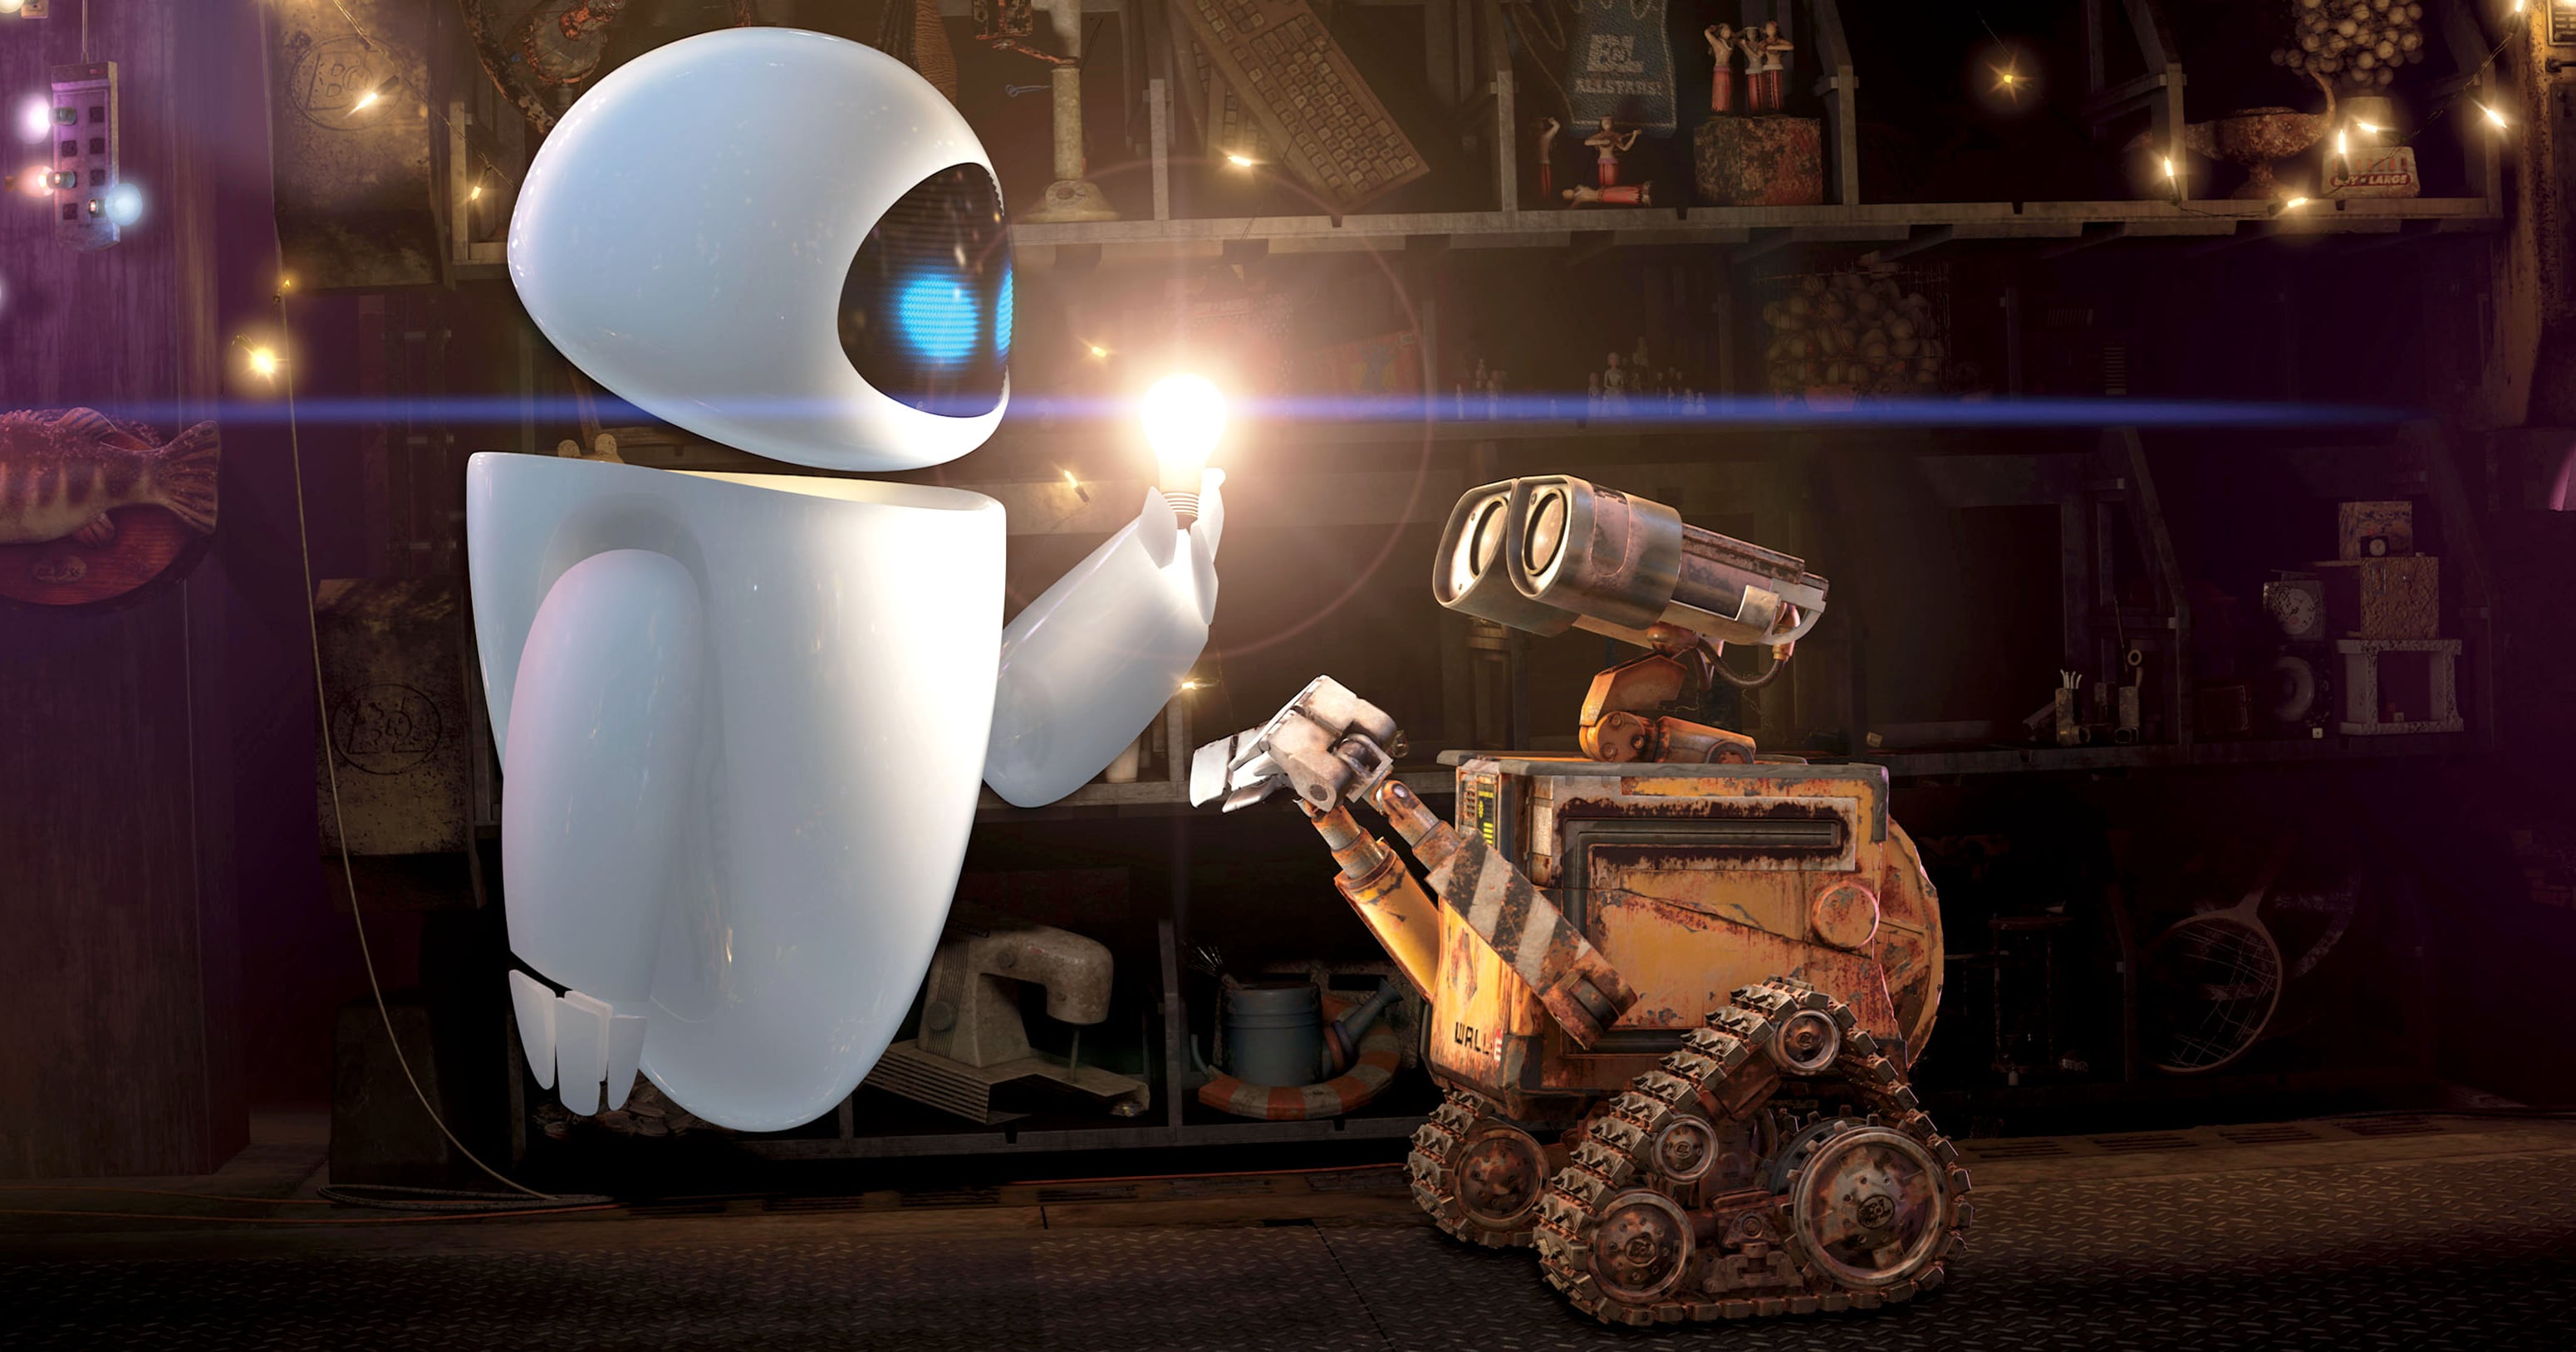 Robots who goof: Can we trust them again?